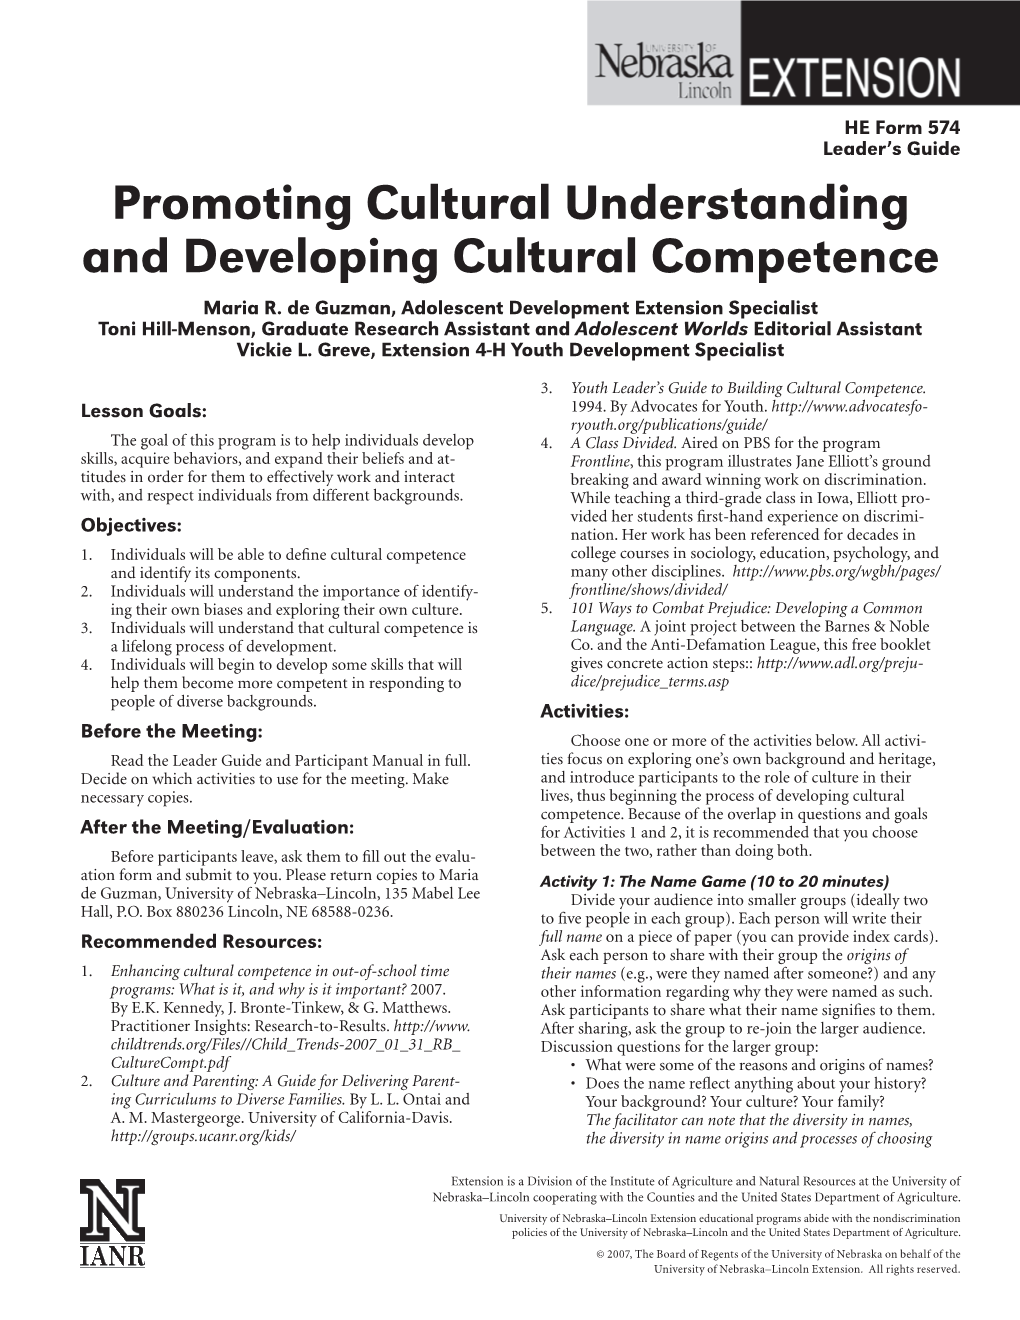 Promoting Cultural Understanding and Developing Cultural Competence Maria R